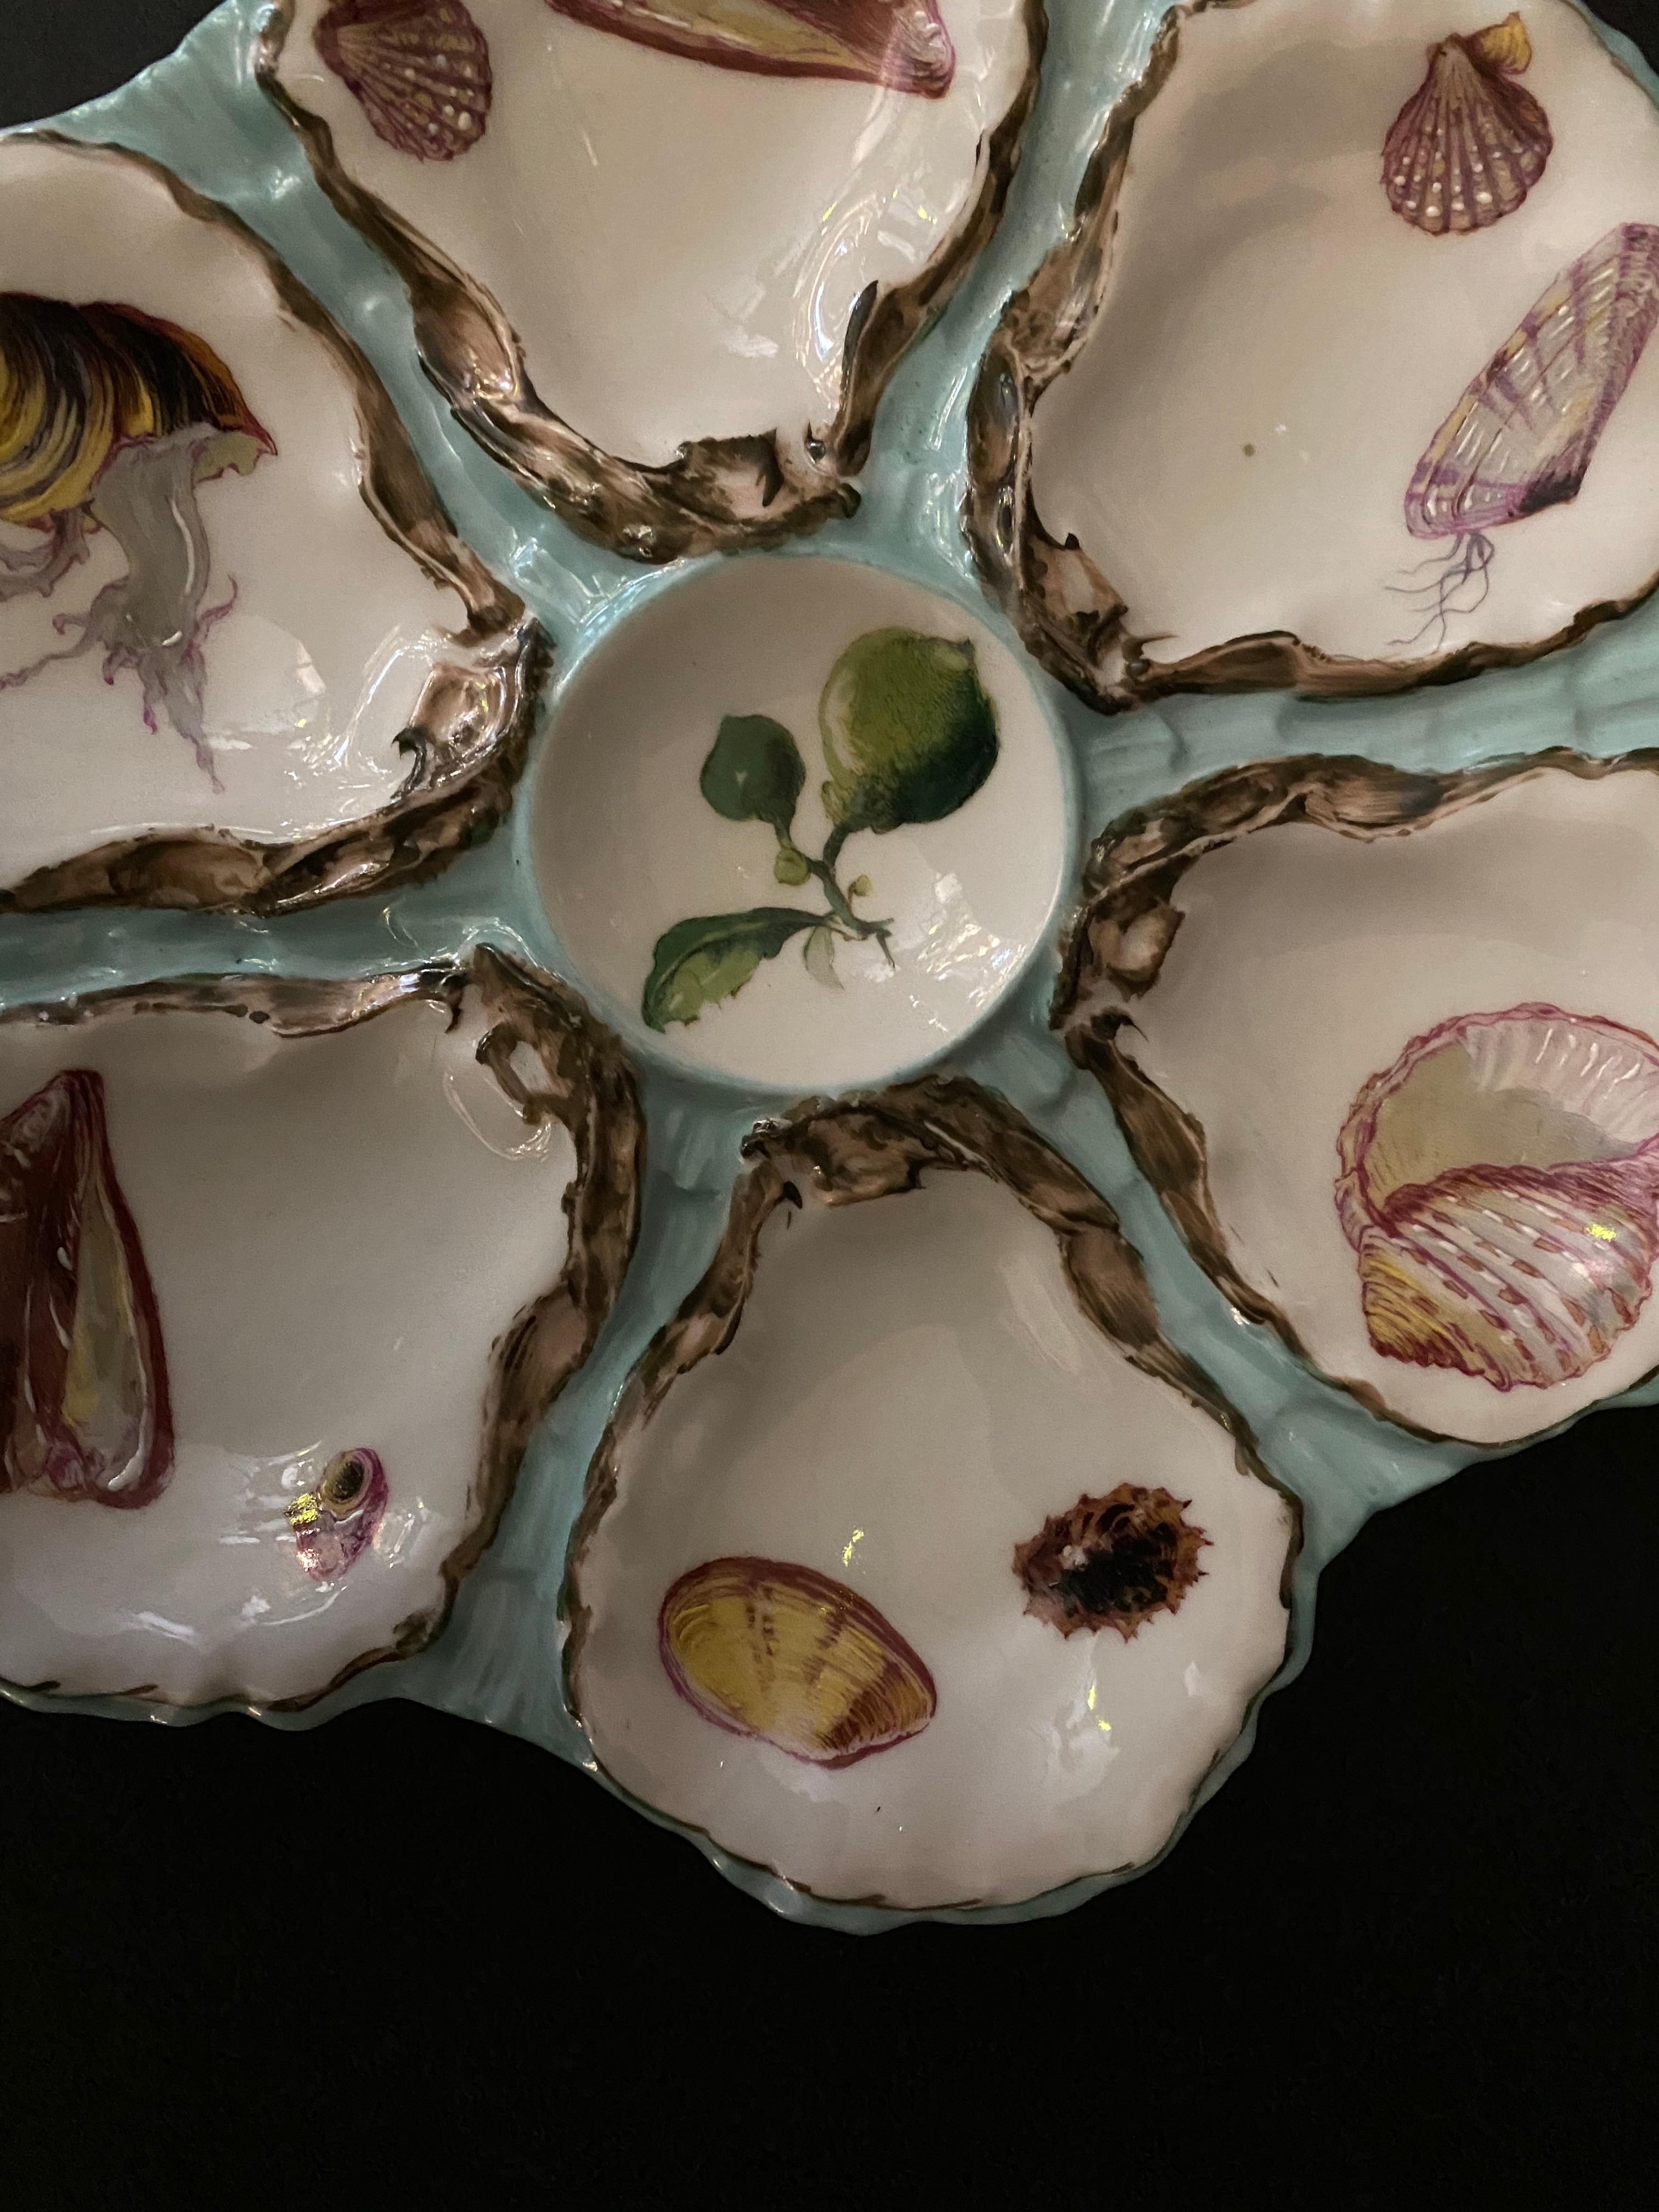 Collector piece, mid-19th century famous Haviland Limoges porcelain oyster plate, with six oyster cradle. The relief of each oyster shells is with refined hand painted details which gives an optical illusion, while the inside of the oysters is